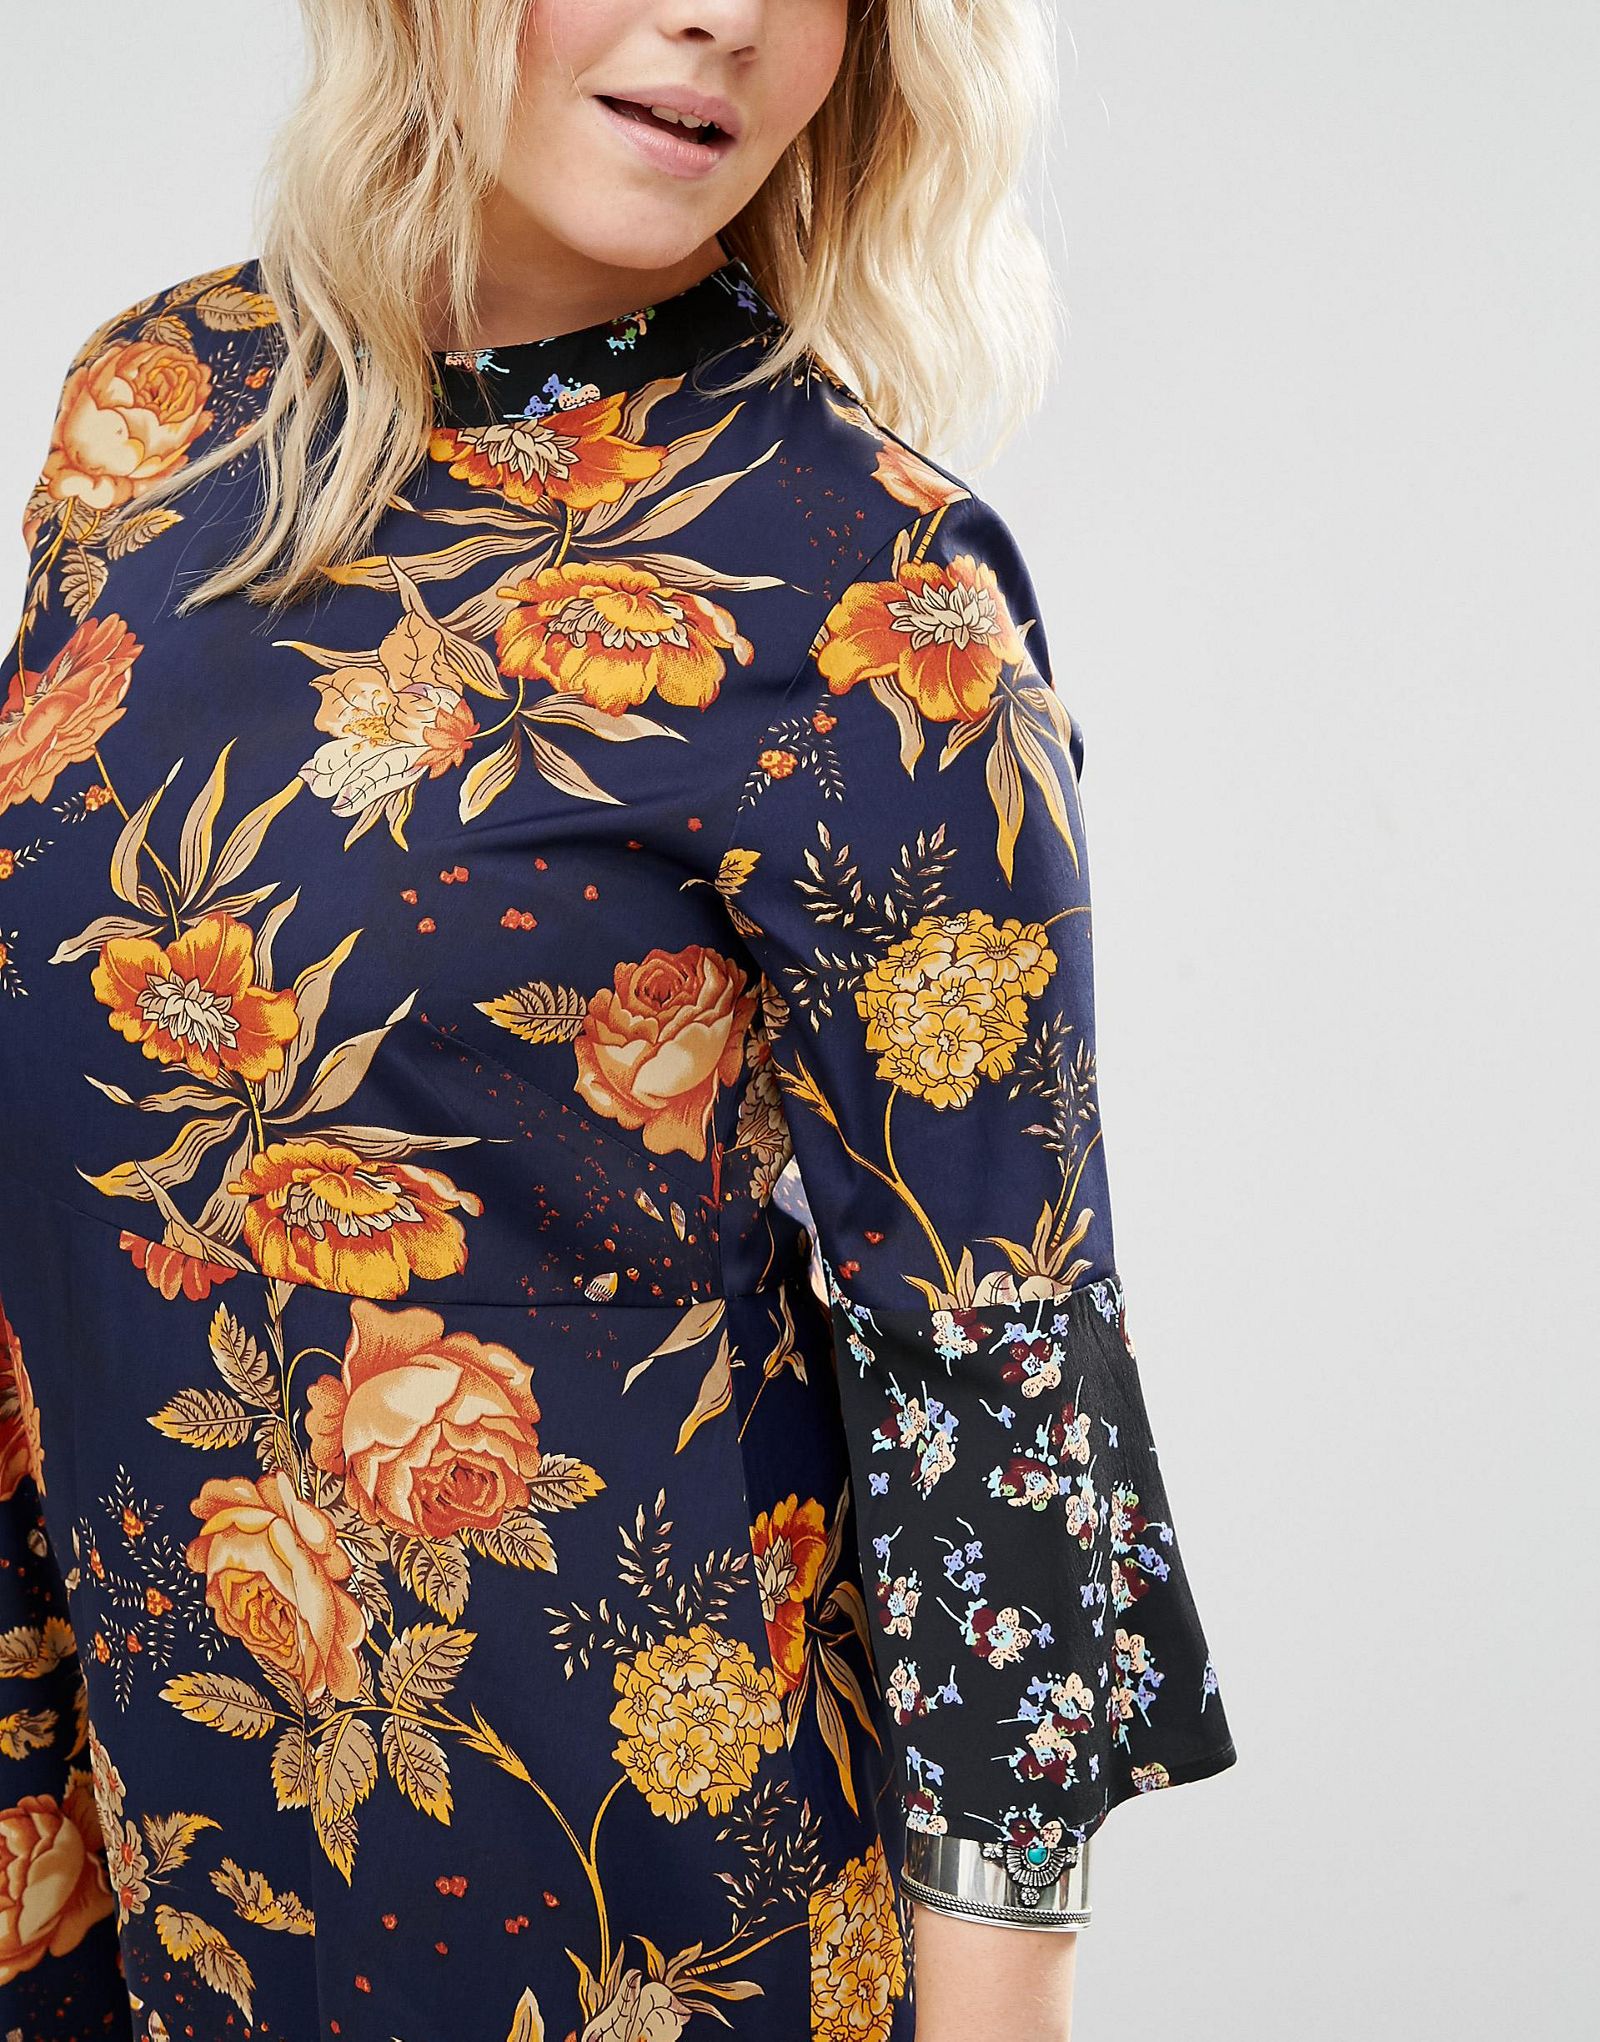 ASOS CURVE Swing Dress with 3/4 Fluted Sleeve in Mixed Floral Print